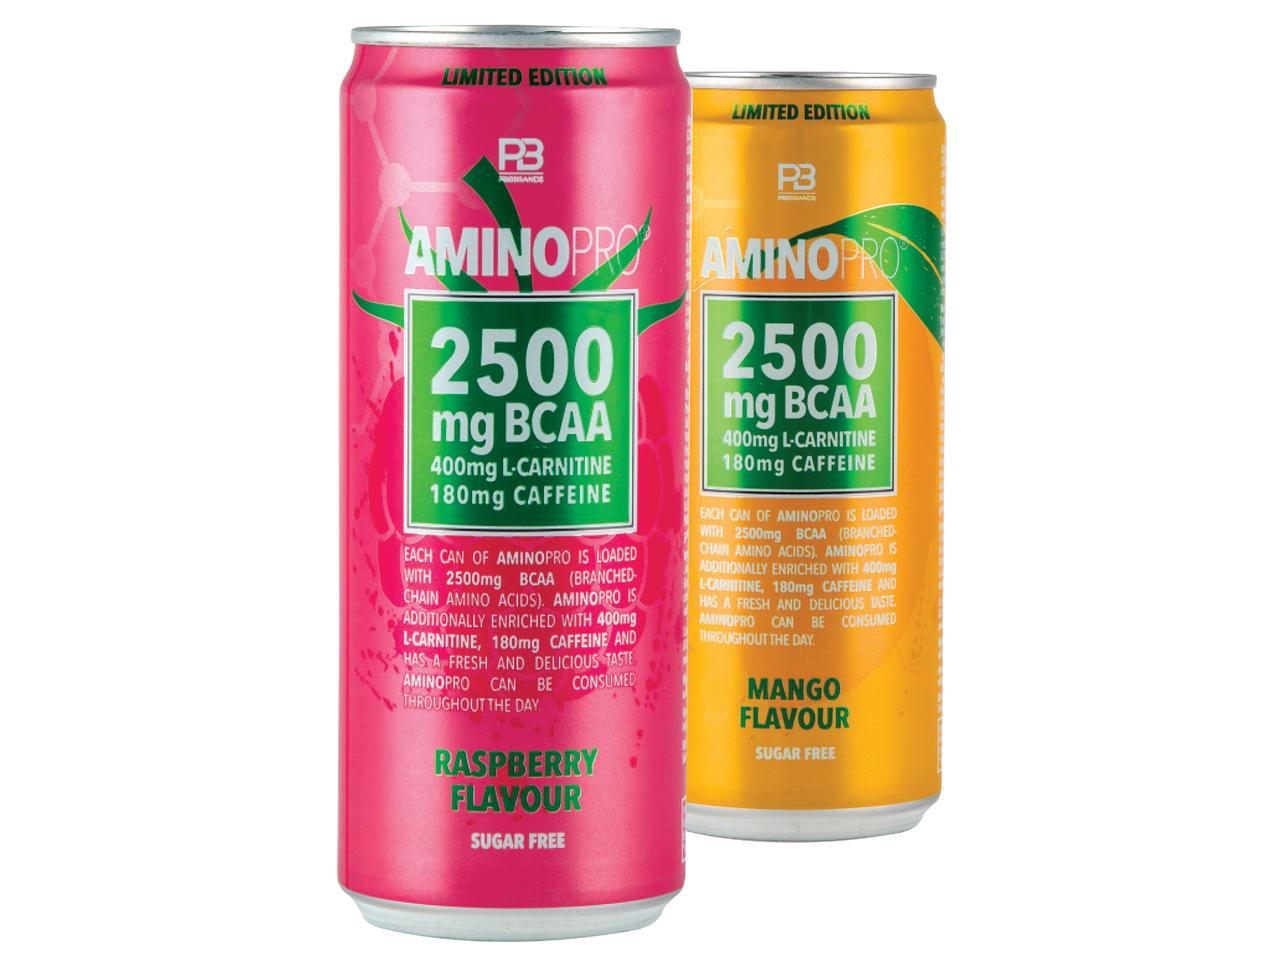 Amino Pro aa Drink Lidl Ireland Specials Archive